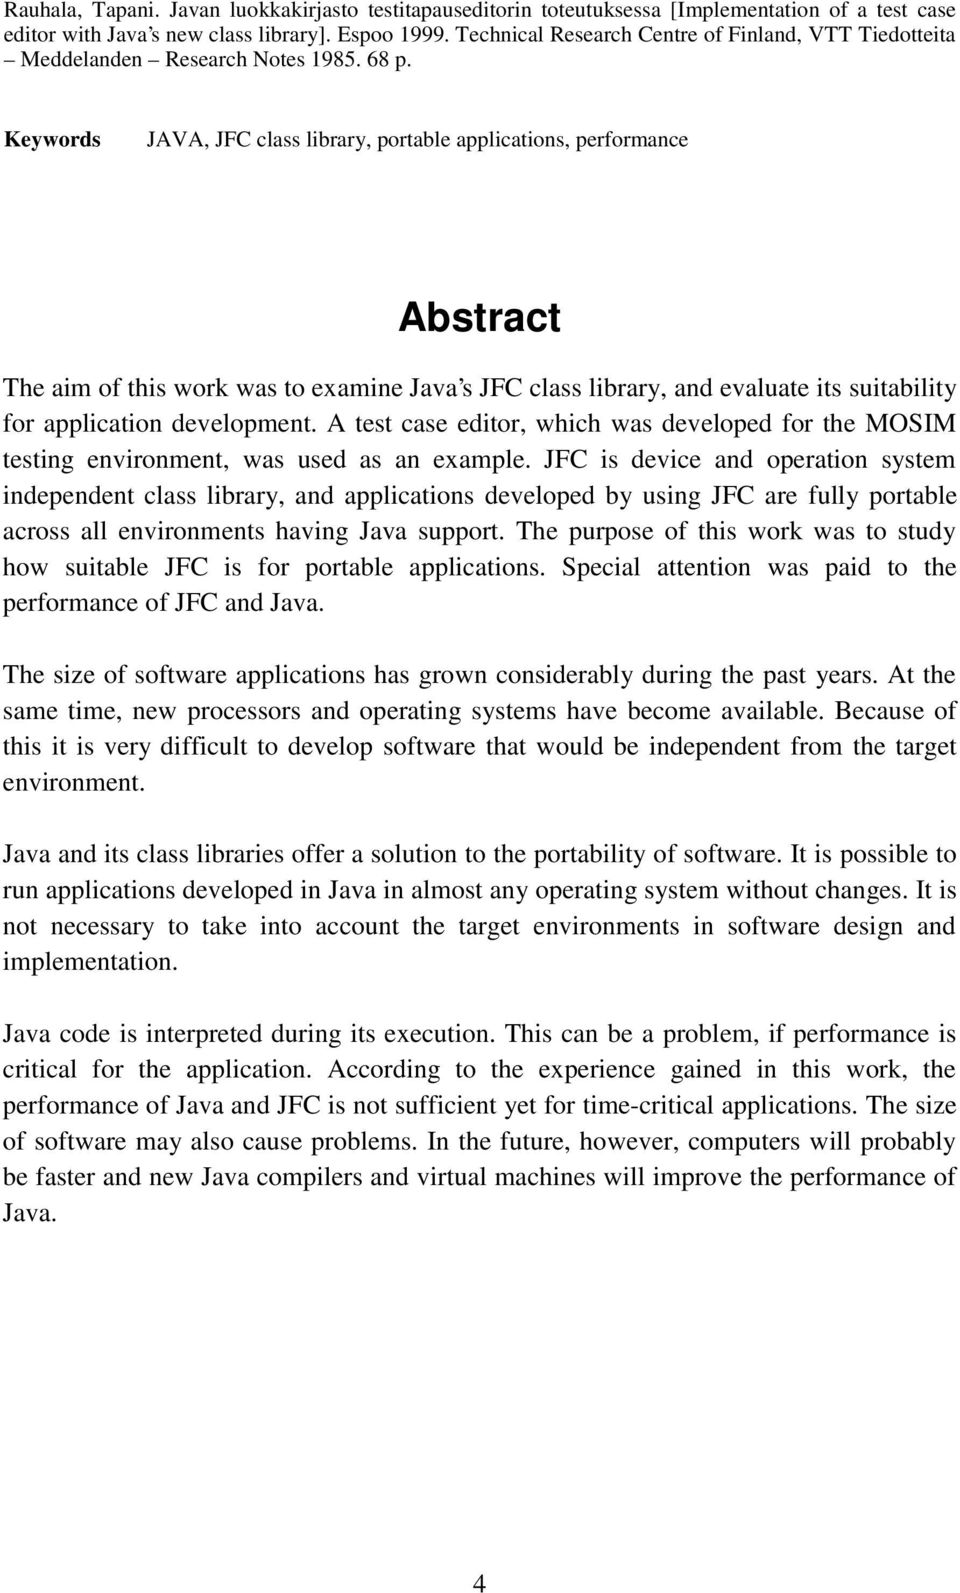 Keywords JAVA, JFC class library, portable applications, performance Abstract The aim of this work was to examine Java s JFC class library, and evaluate its suitability for application development.